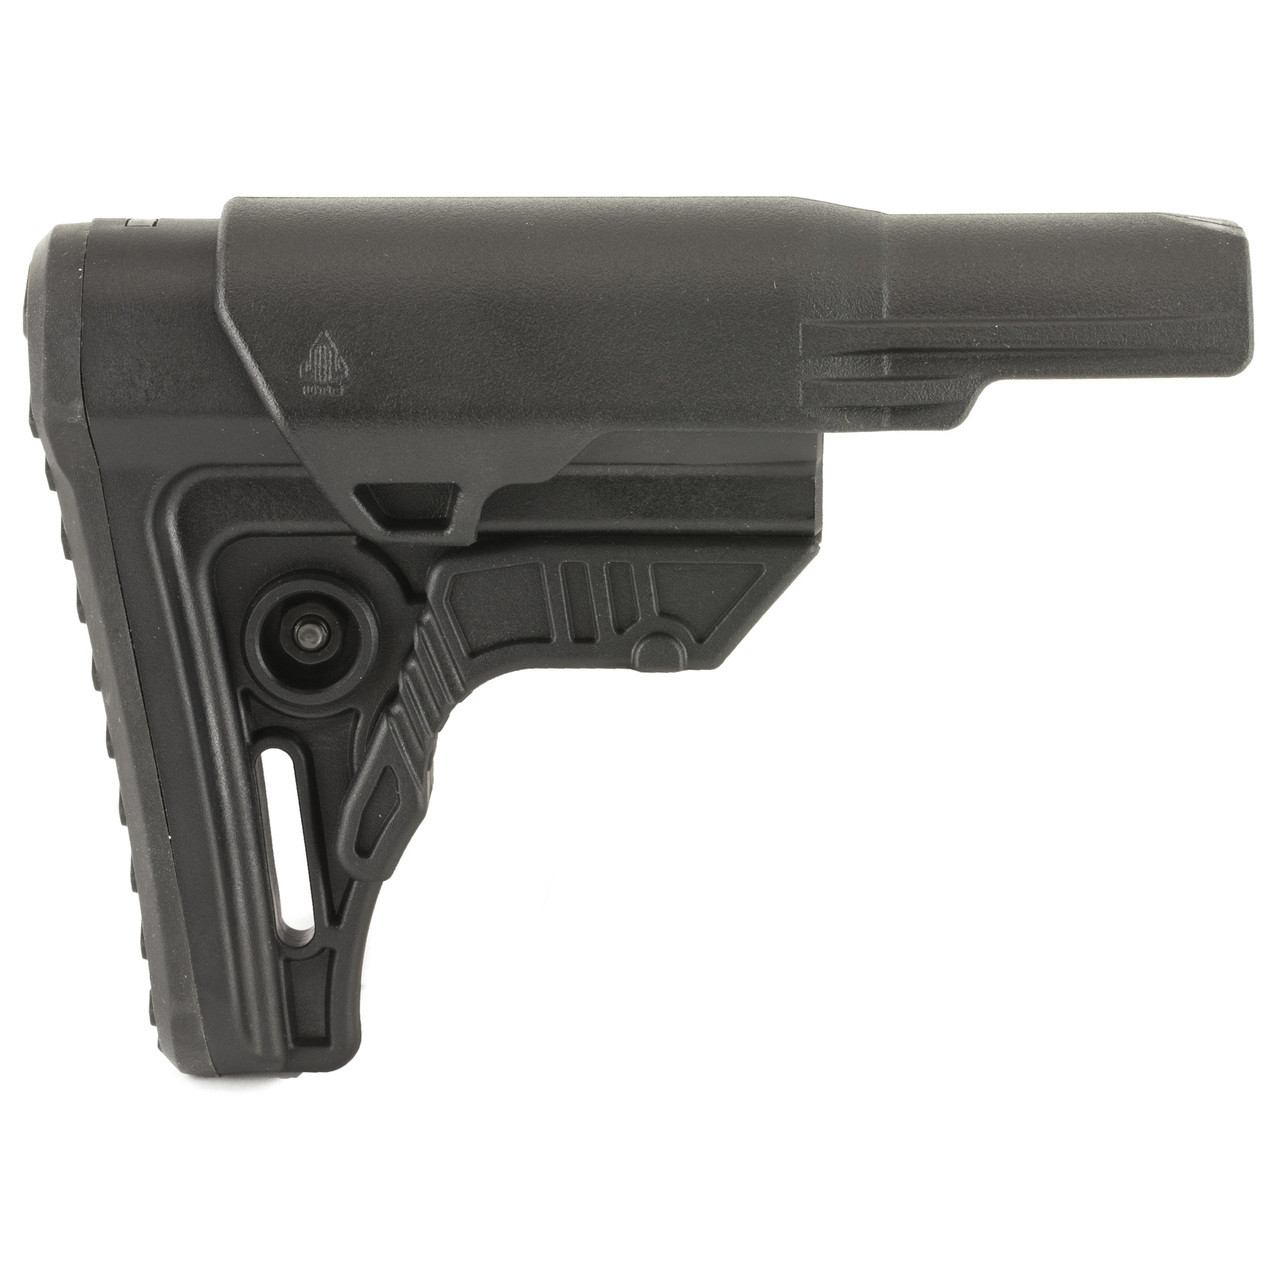 Leapers, Inc. - UTG UTG PRO,Mil-spec Stock, Black Finish, Fits AR-15,  Compact Size, Includes Cheek Rest Plus Removable Extended Cheek Rest  Insert, Rubberized Butt Pad RBUS4BMS, UPC :4717385552753